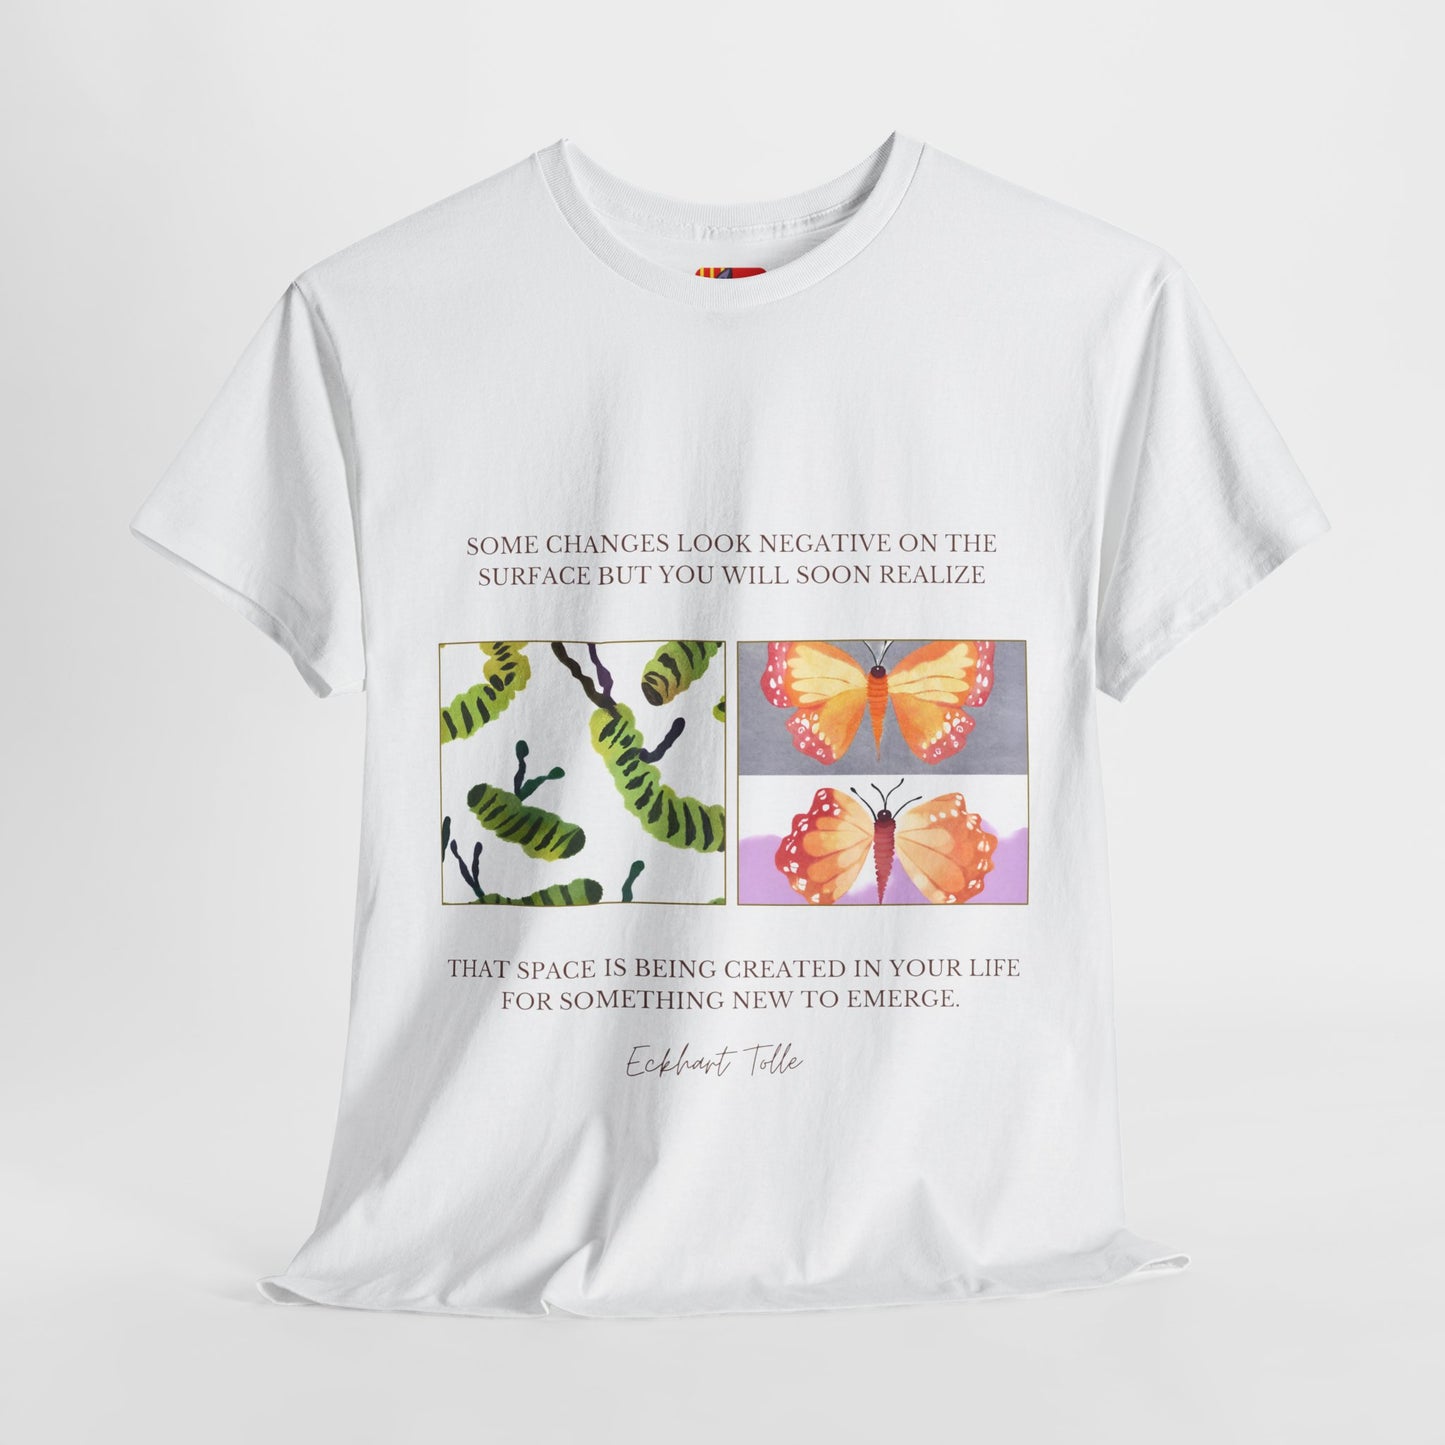 The New Beginnings T-Shirt: Make Room for Growth"Space is being created..." Eckhart Tolle